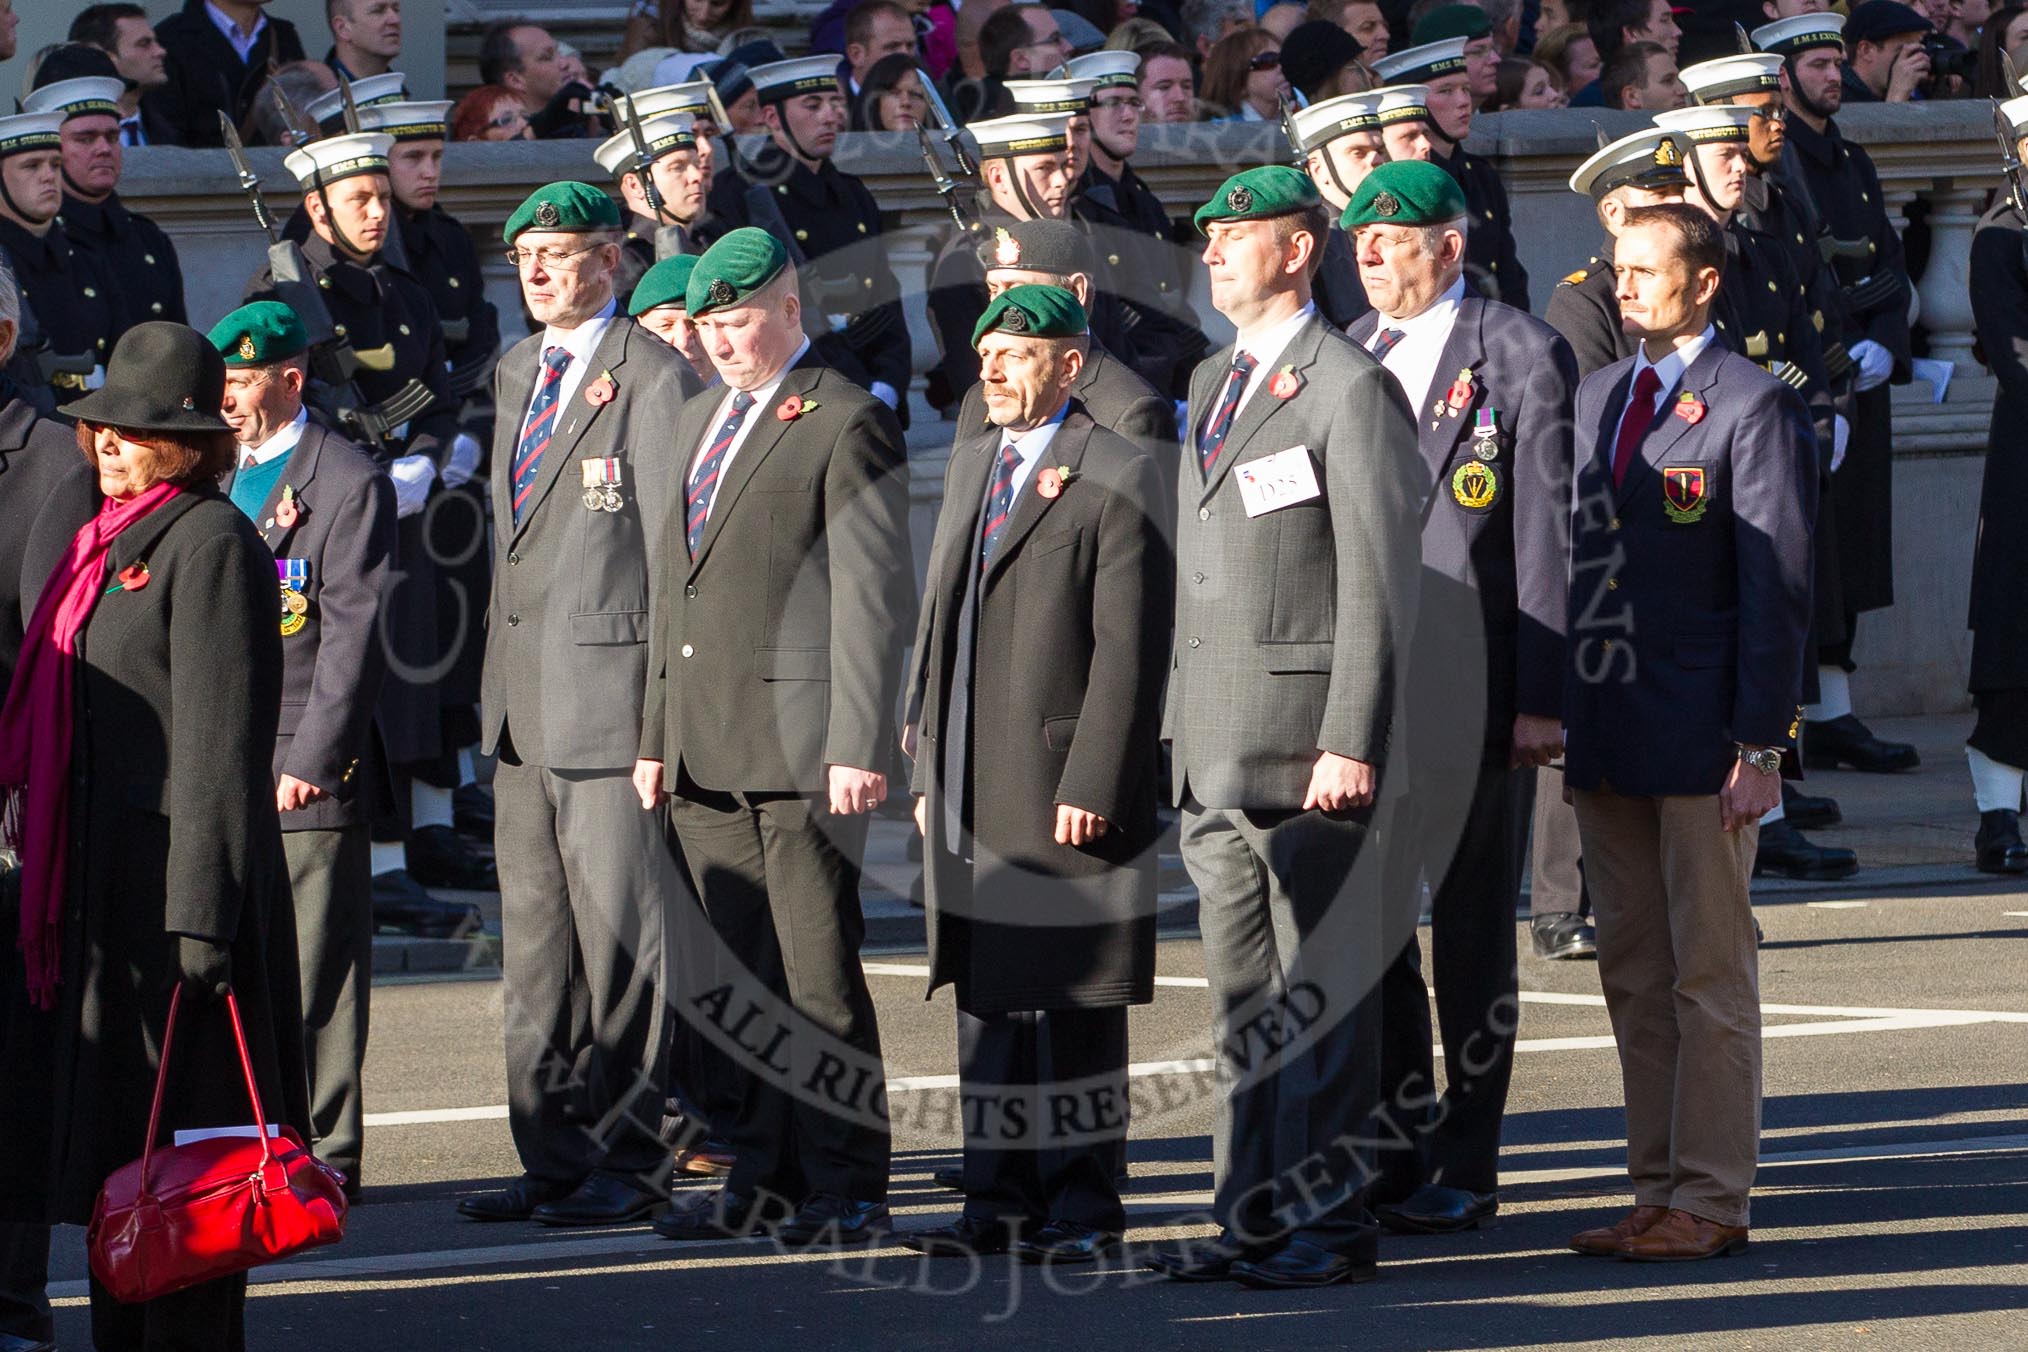 Remembrance Sunday 2012 Cenotaph March Past: Group D24 - St Helena Government UK and  D25 - Commando Veterans Association..
Whitehall, Cenotaph,
London SW1,

United Kingdom,
on 11 November 2012 at 12:08, image #1408